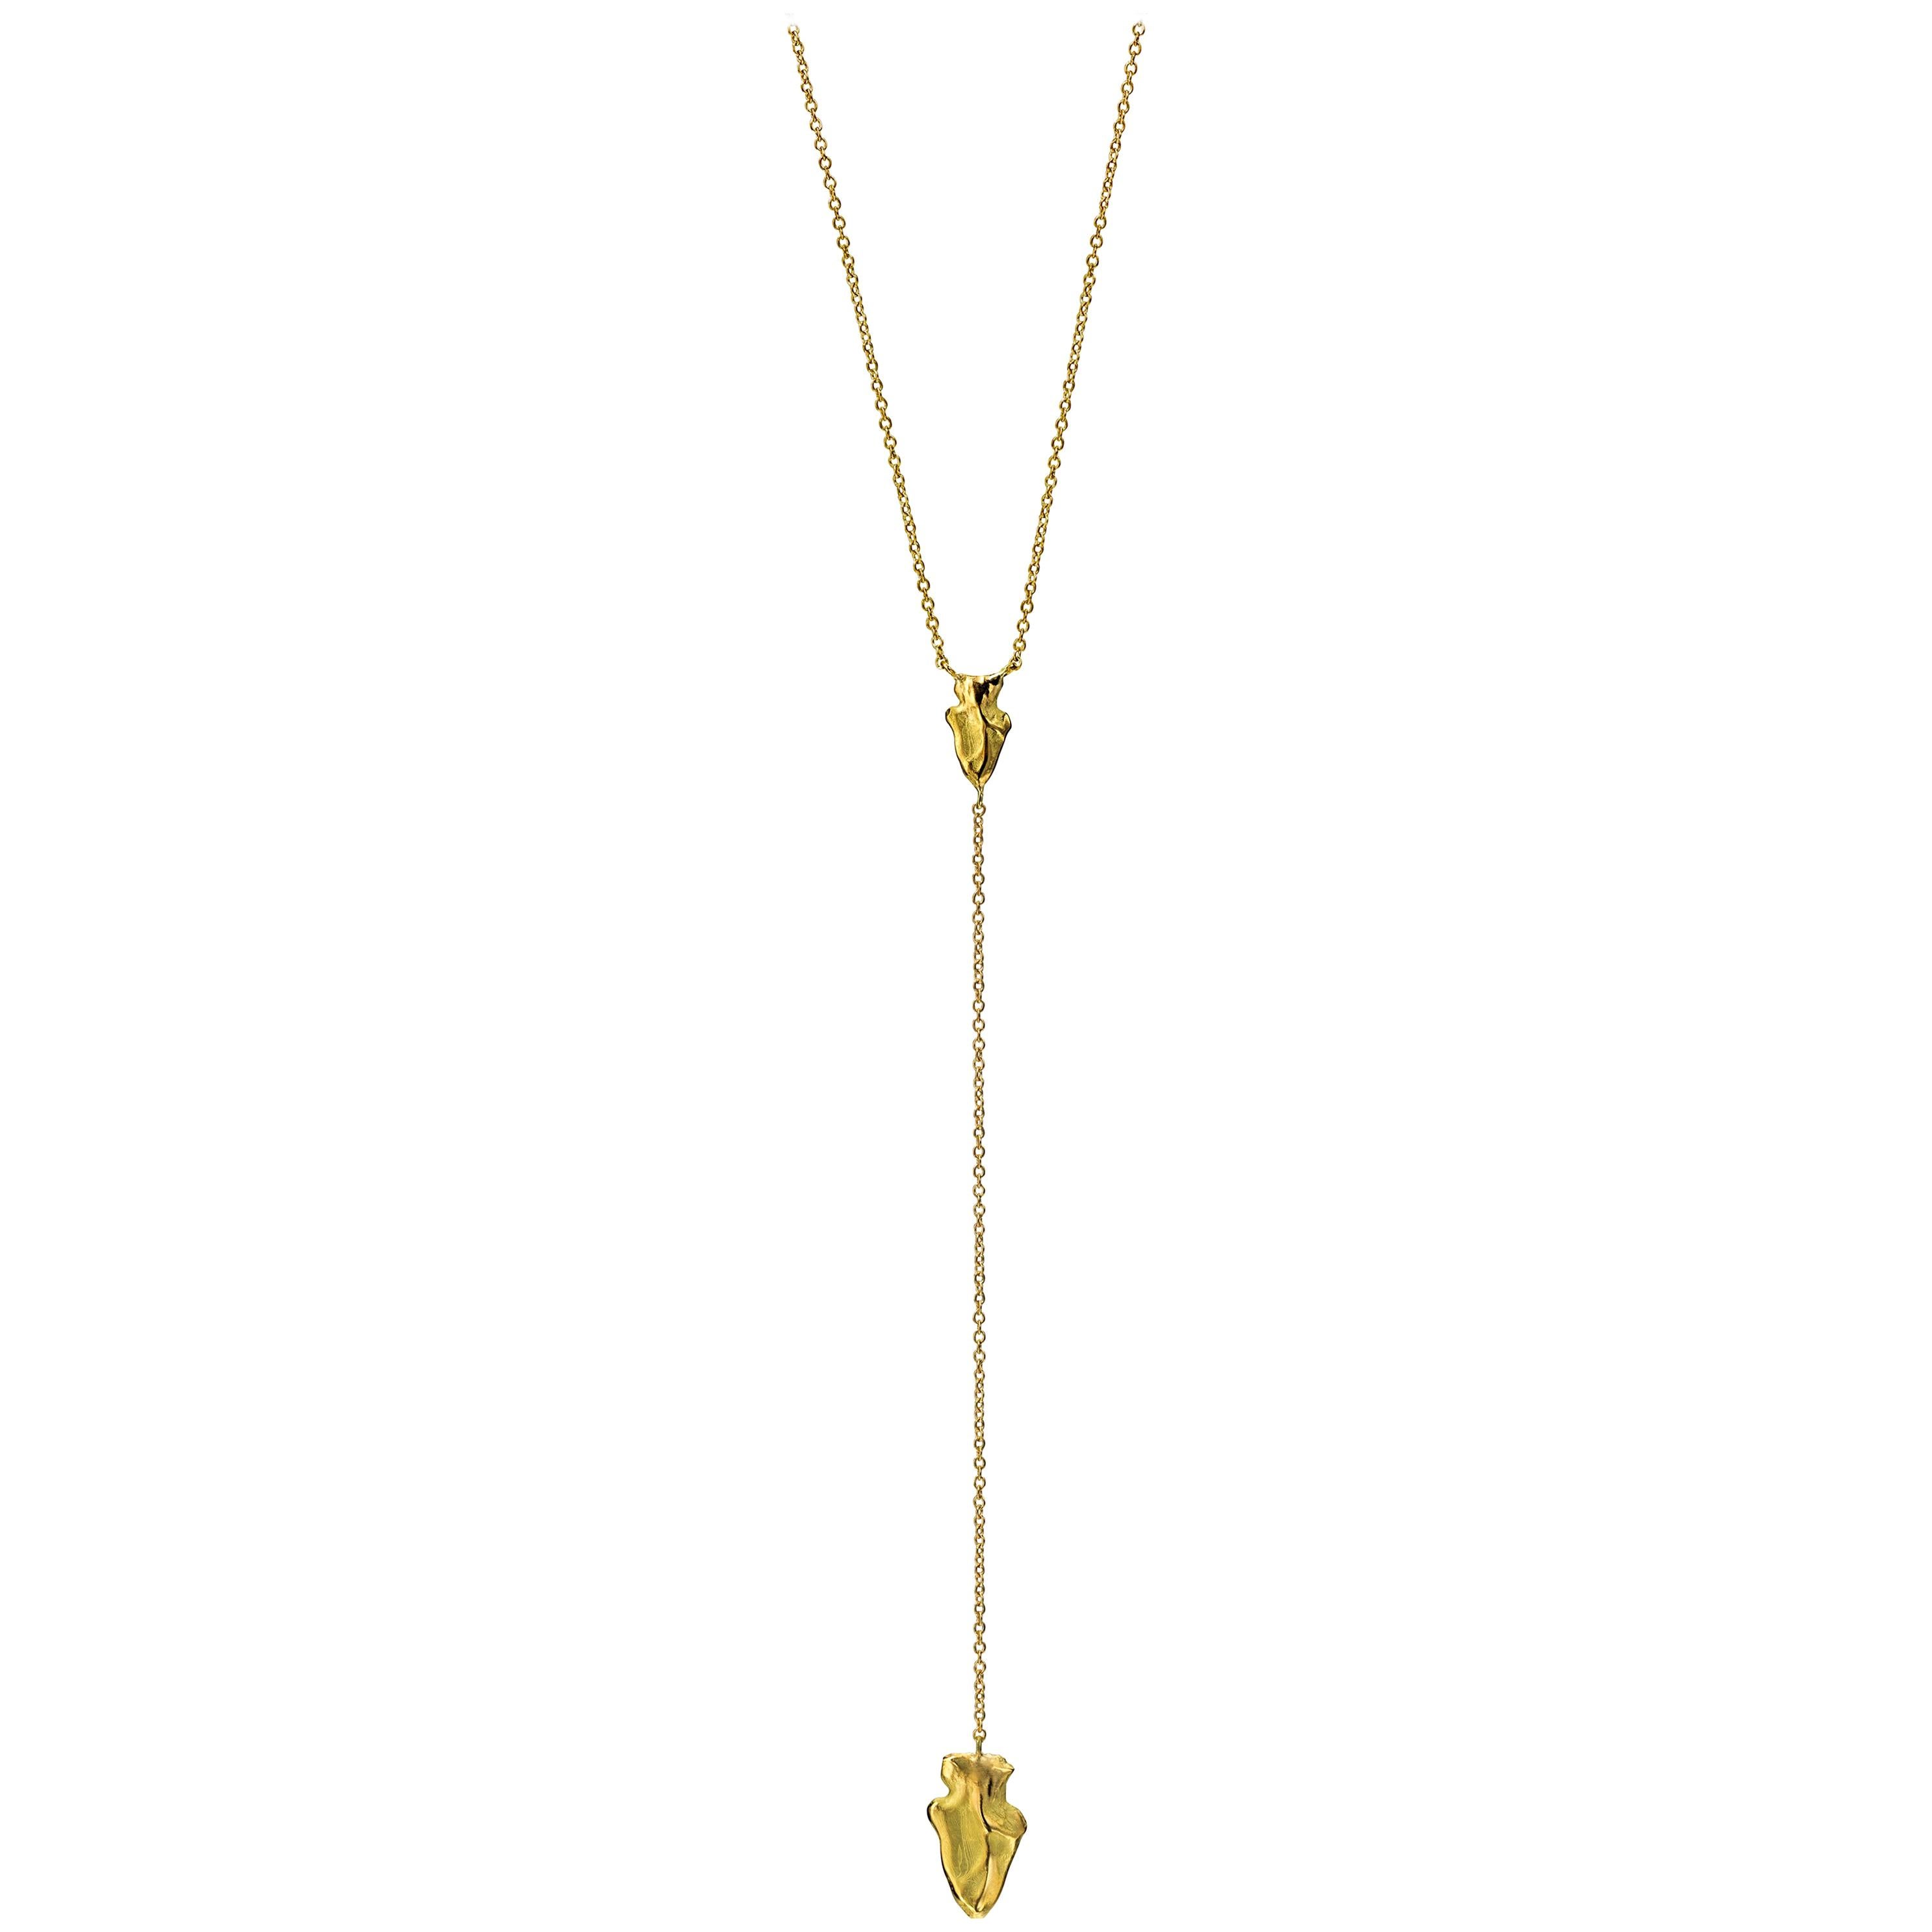 Wendy Brandes Arrowhead Lariat Yellow Gold Y-Necklace